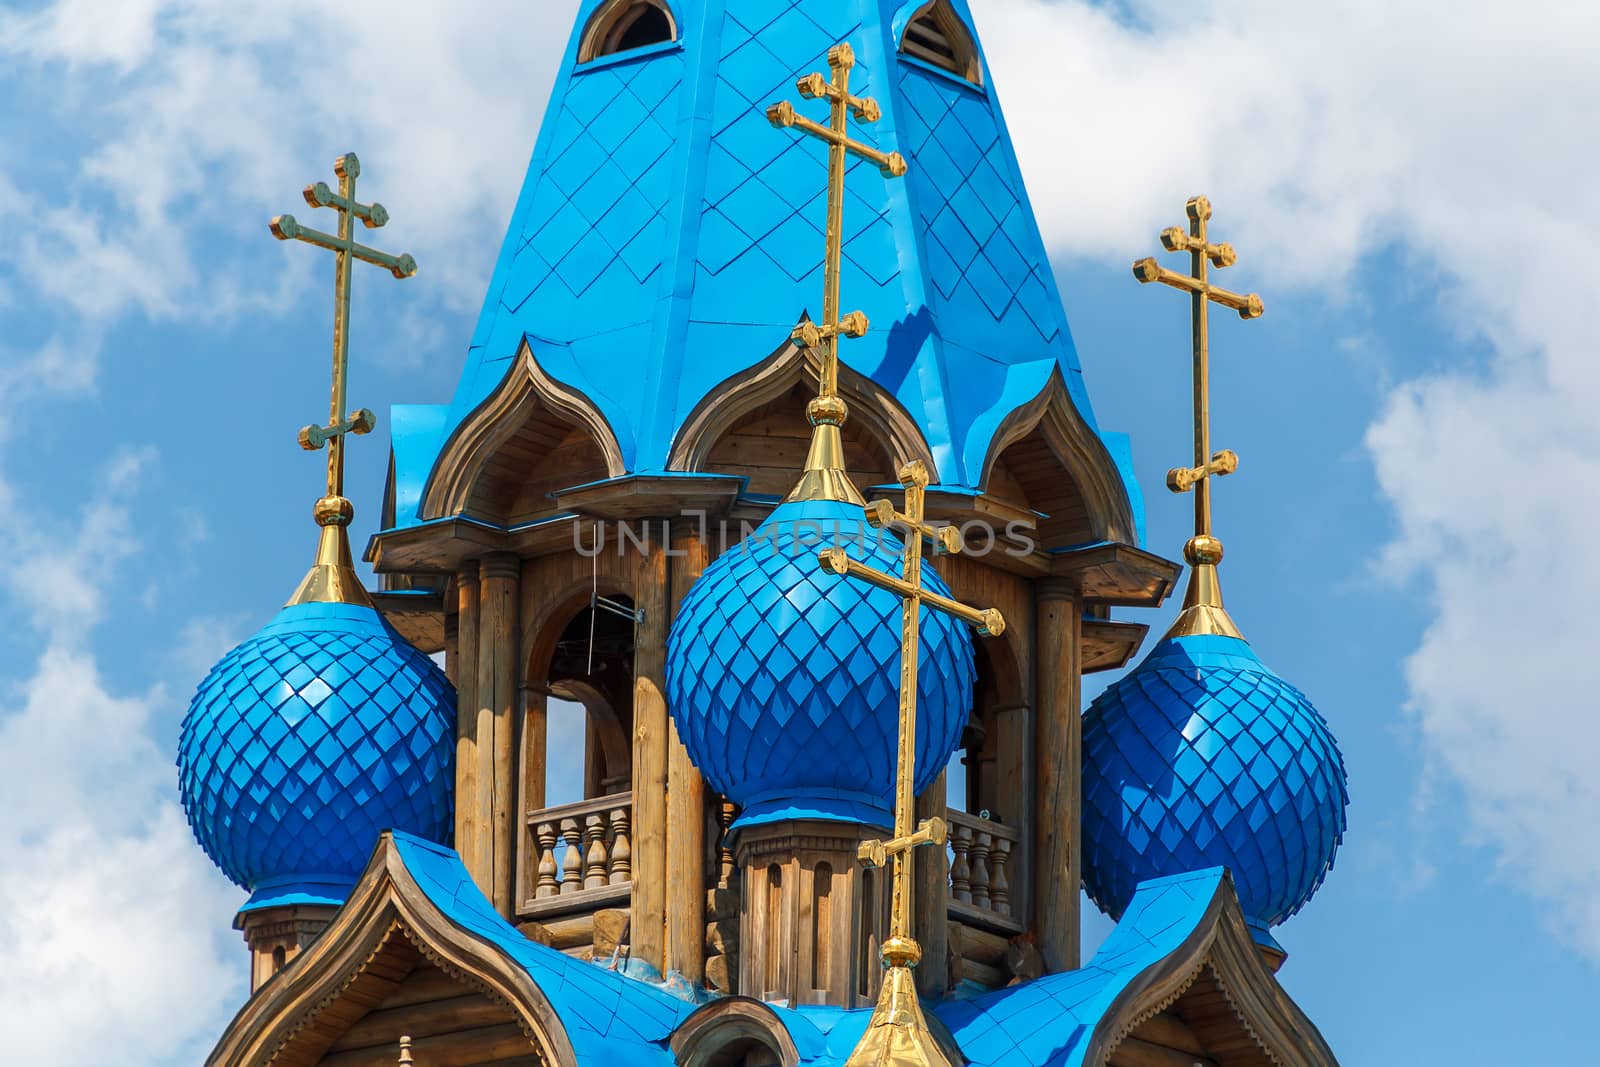 Blue domes and gold crosses of the orthodox church